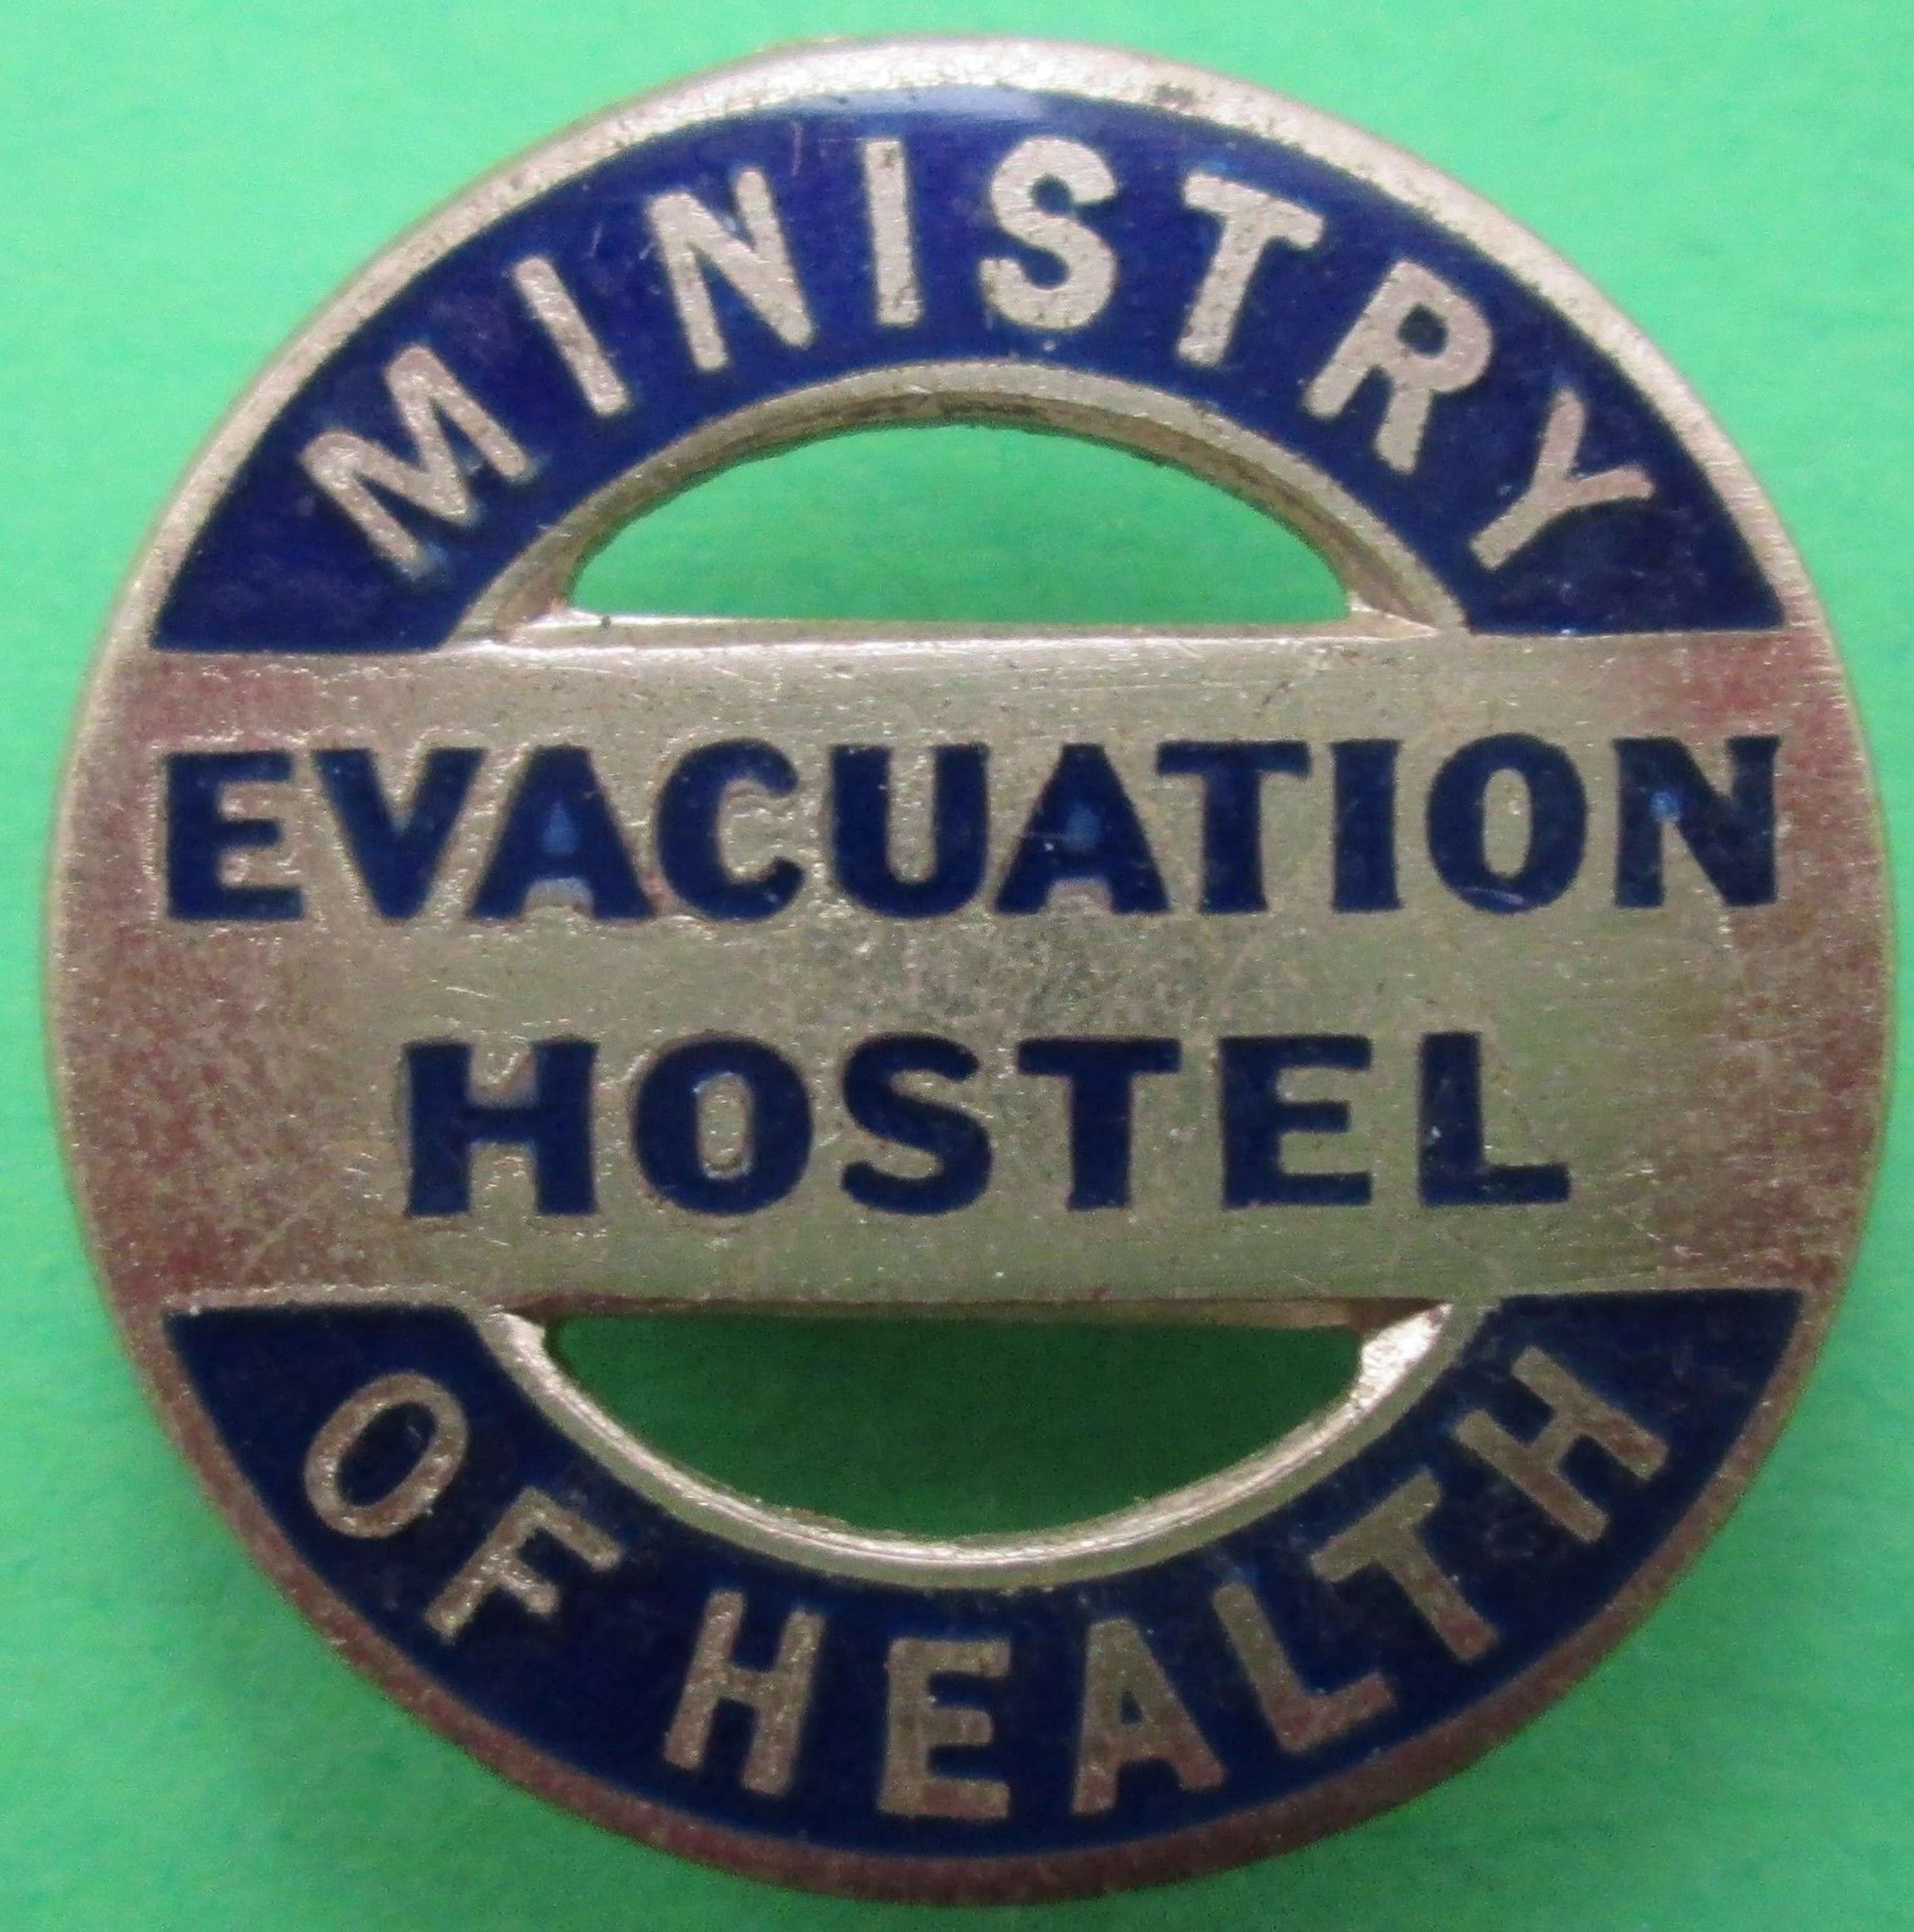 A WWII MINISTRY OF HEALTH EVACUATION HOSTEL BADGE